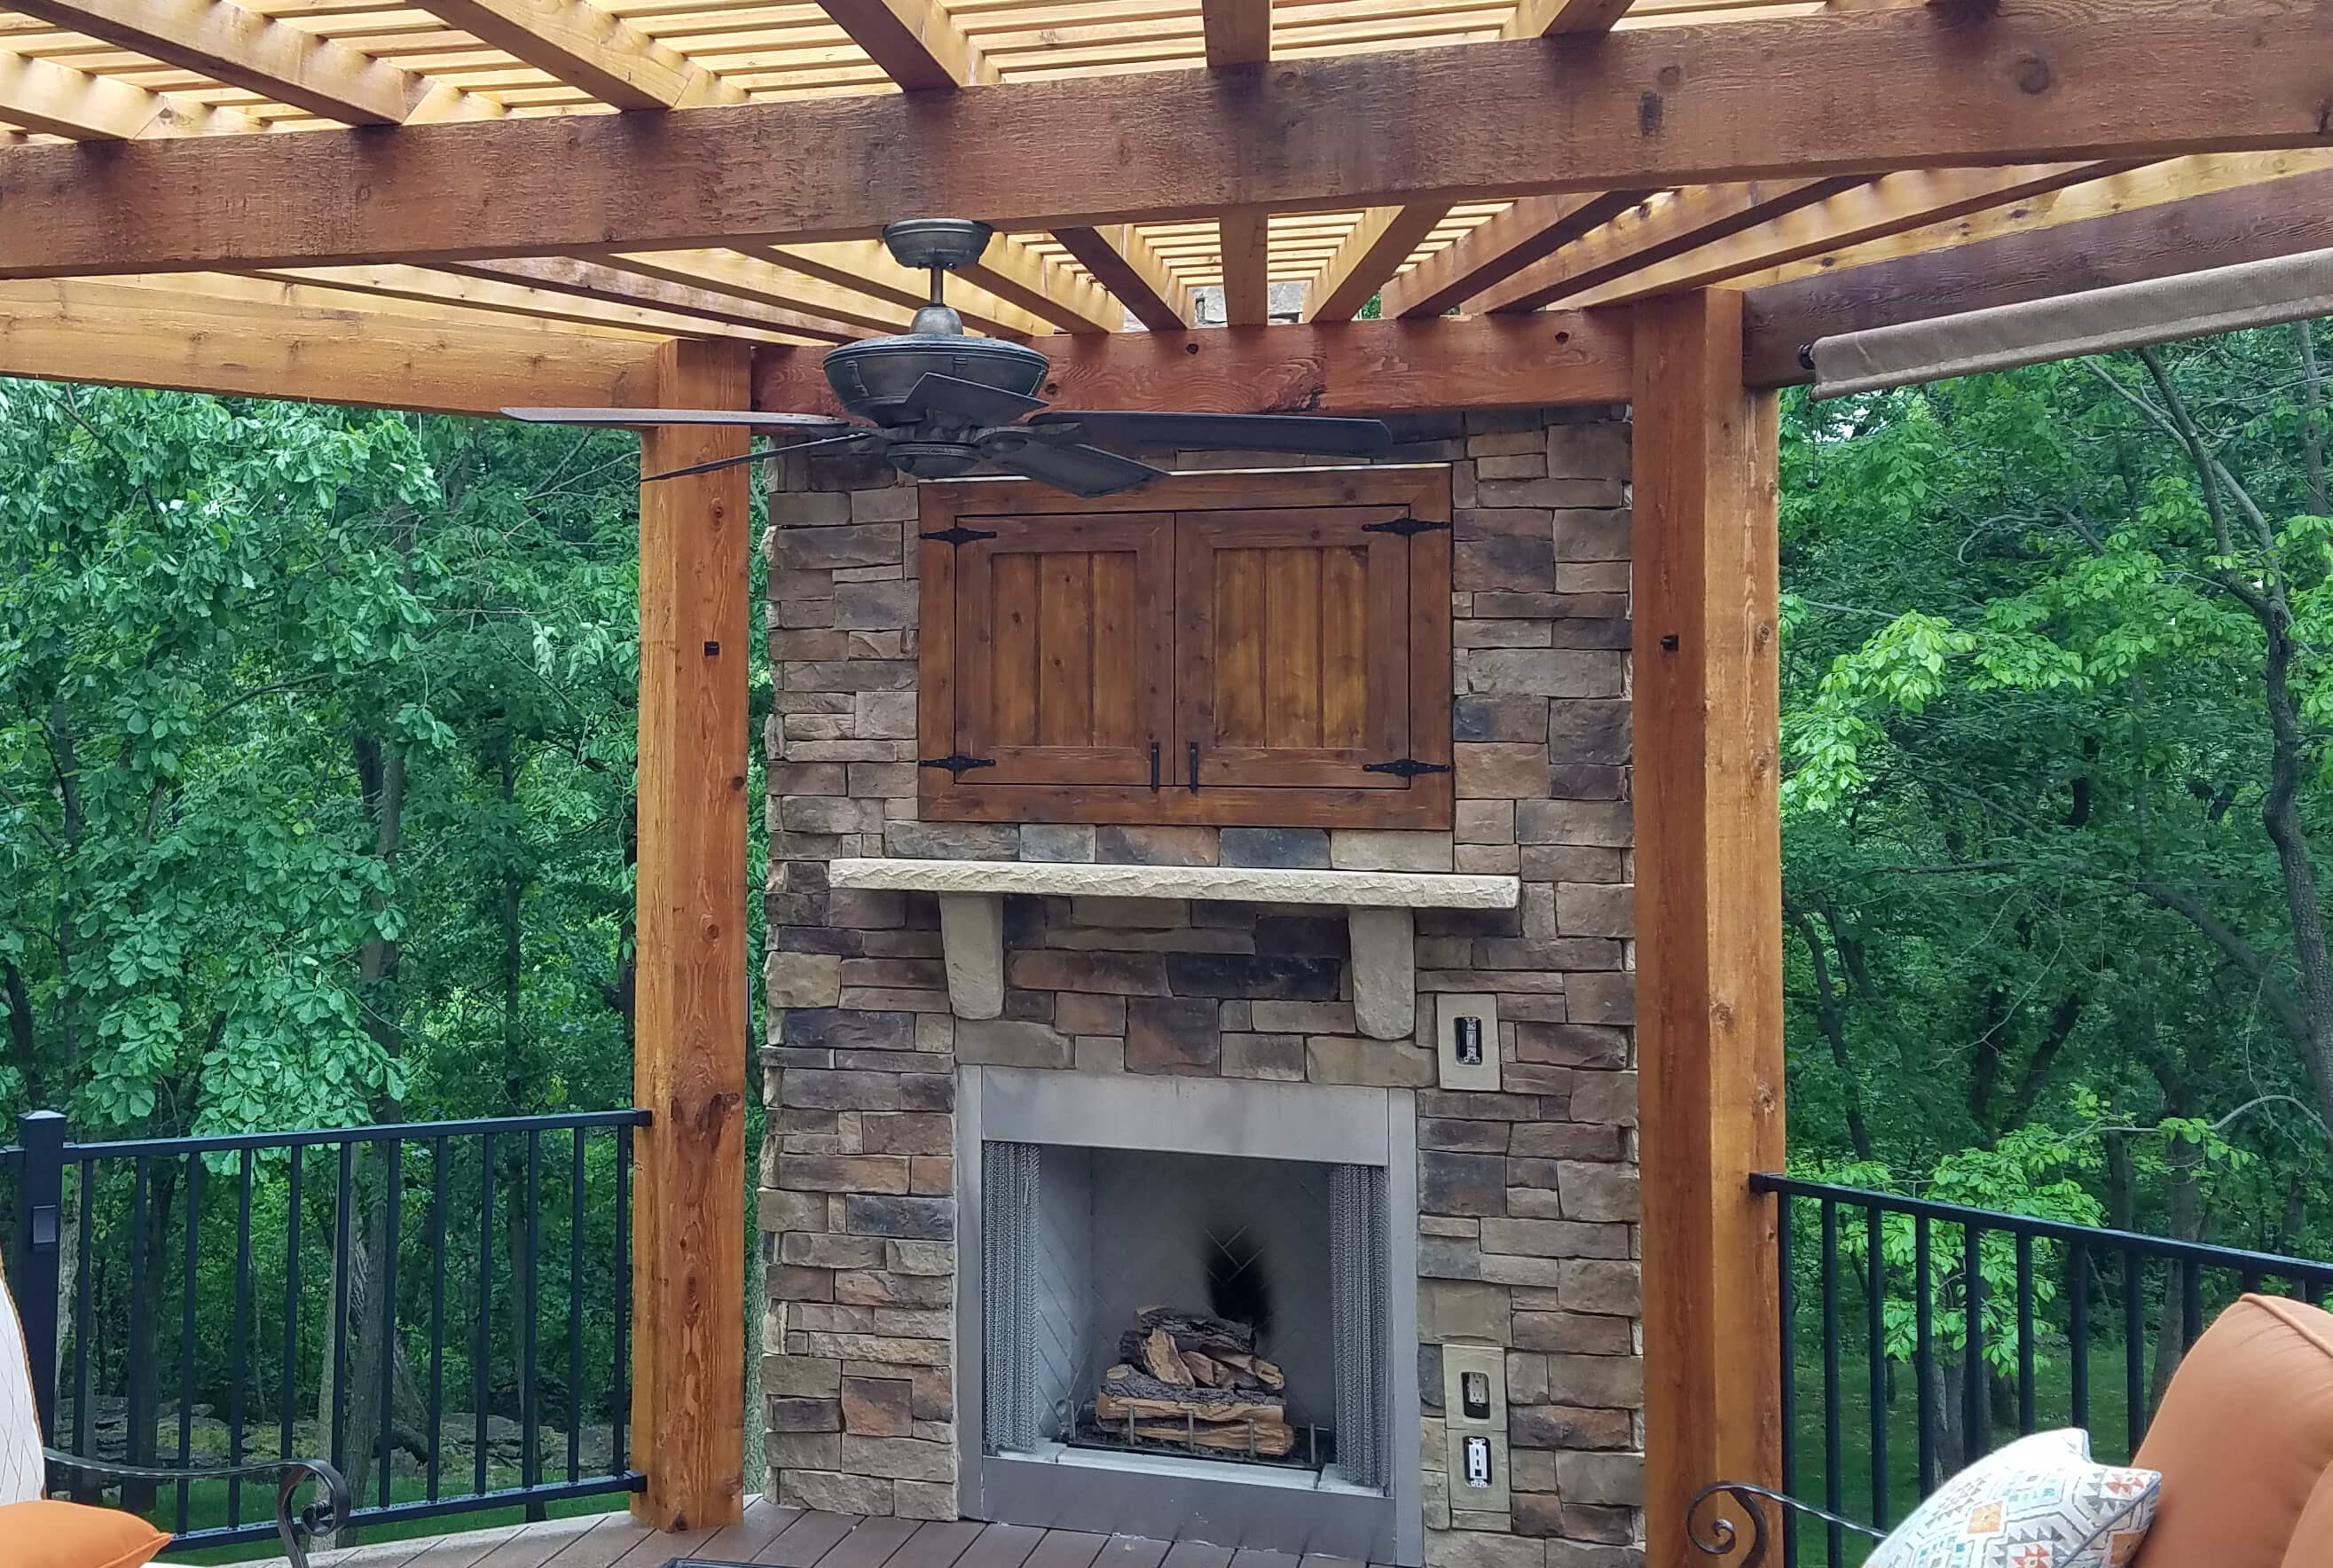 Outdoor fireplace and pergola on deck